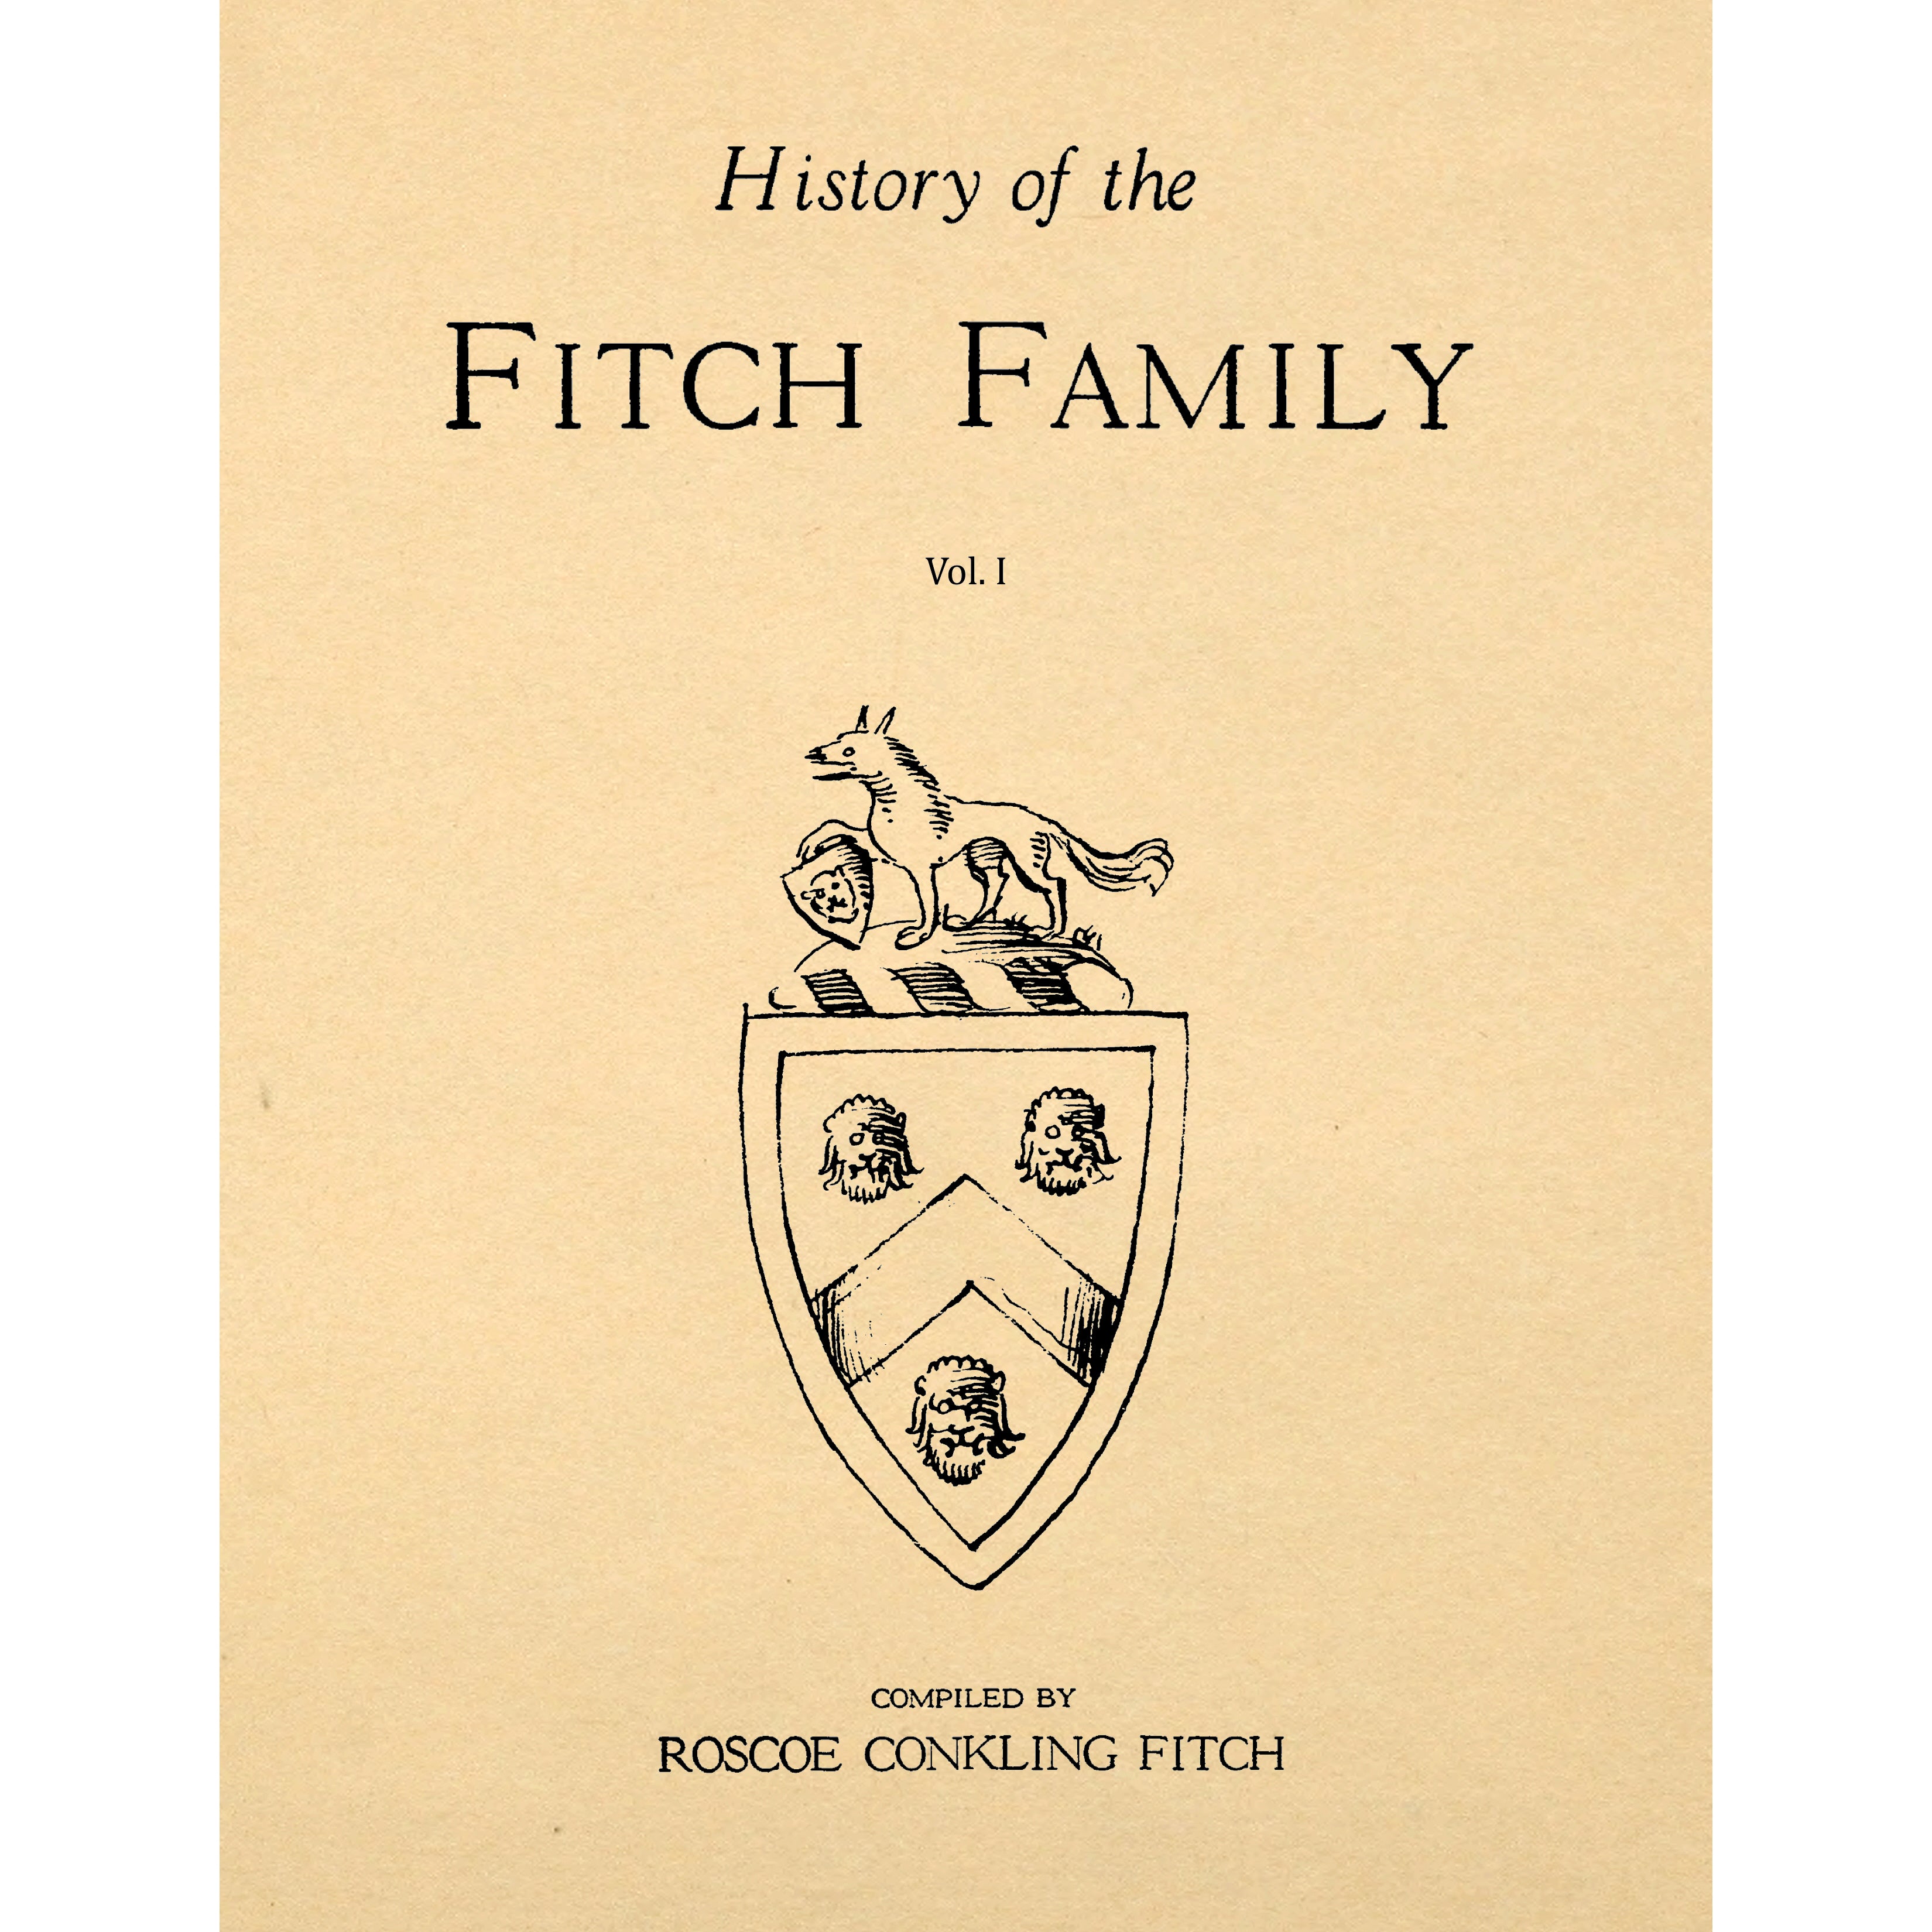 History Of The Fitch Family A.D. 1400 -- 1930